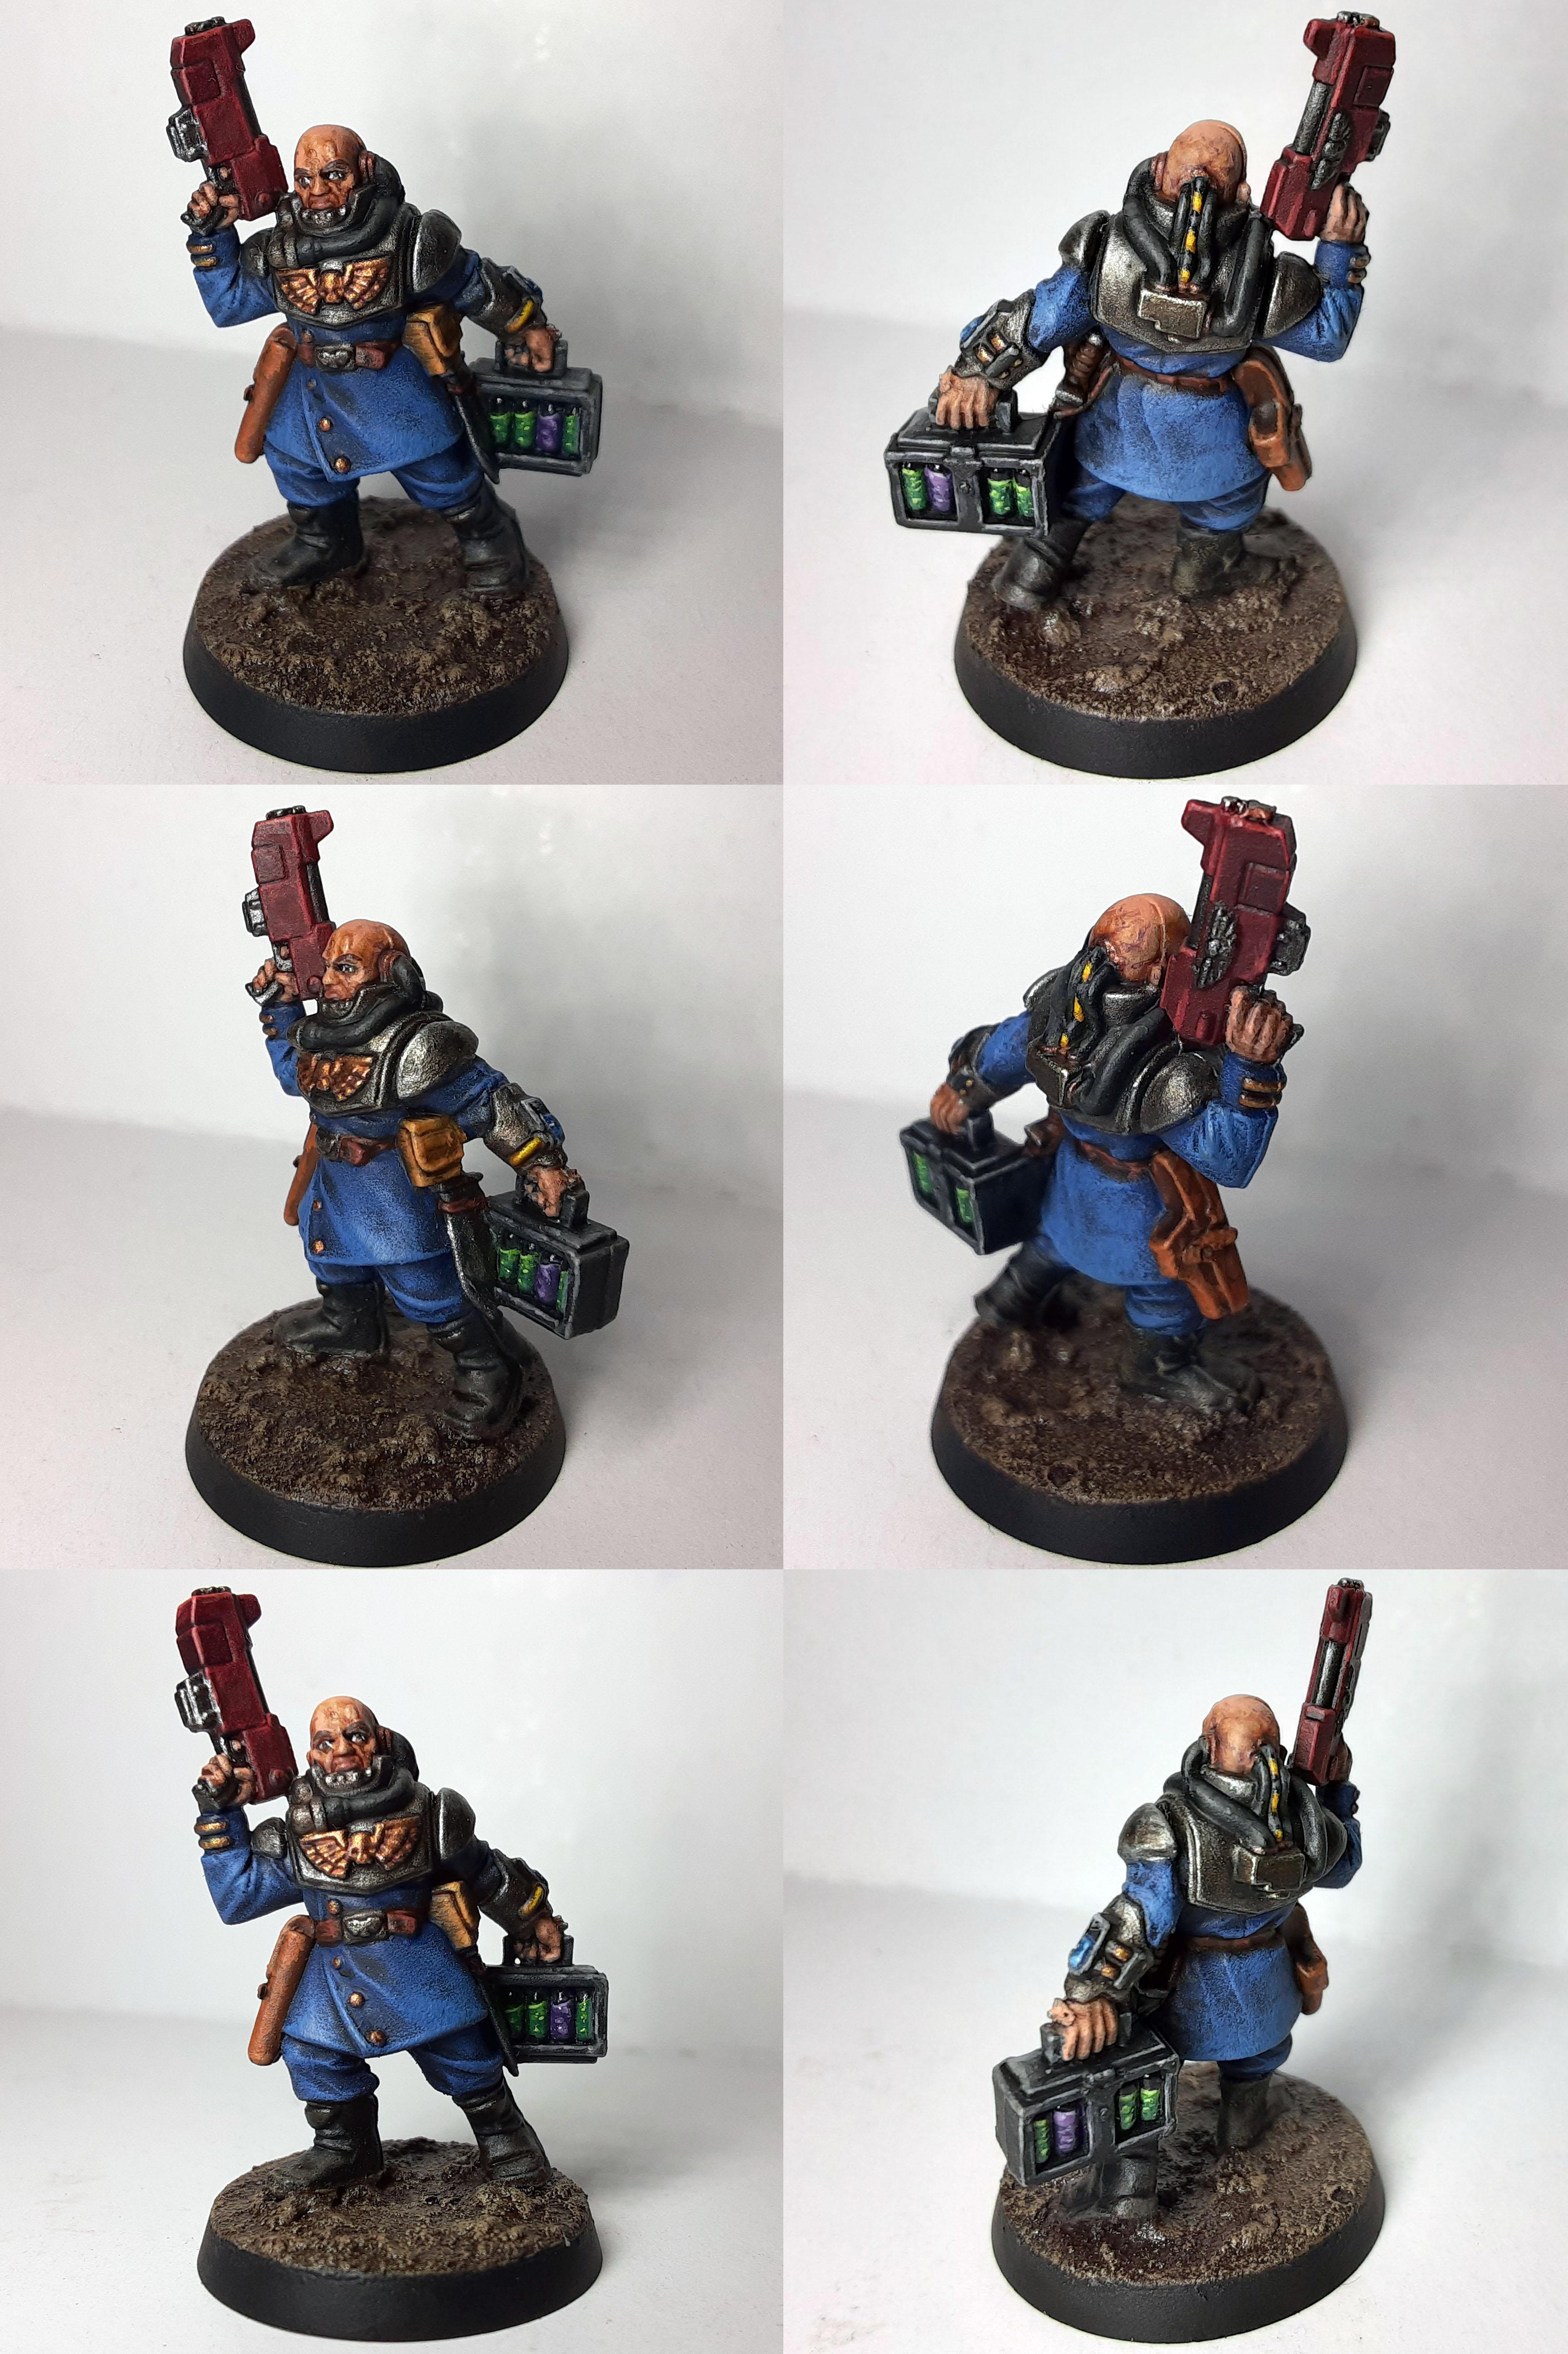 Imperial Guard, Imperial Navy, Warhammer 40,000